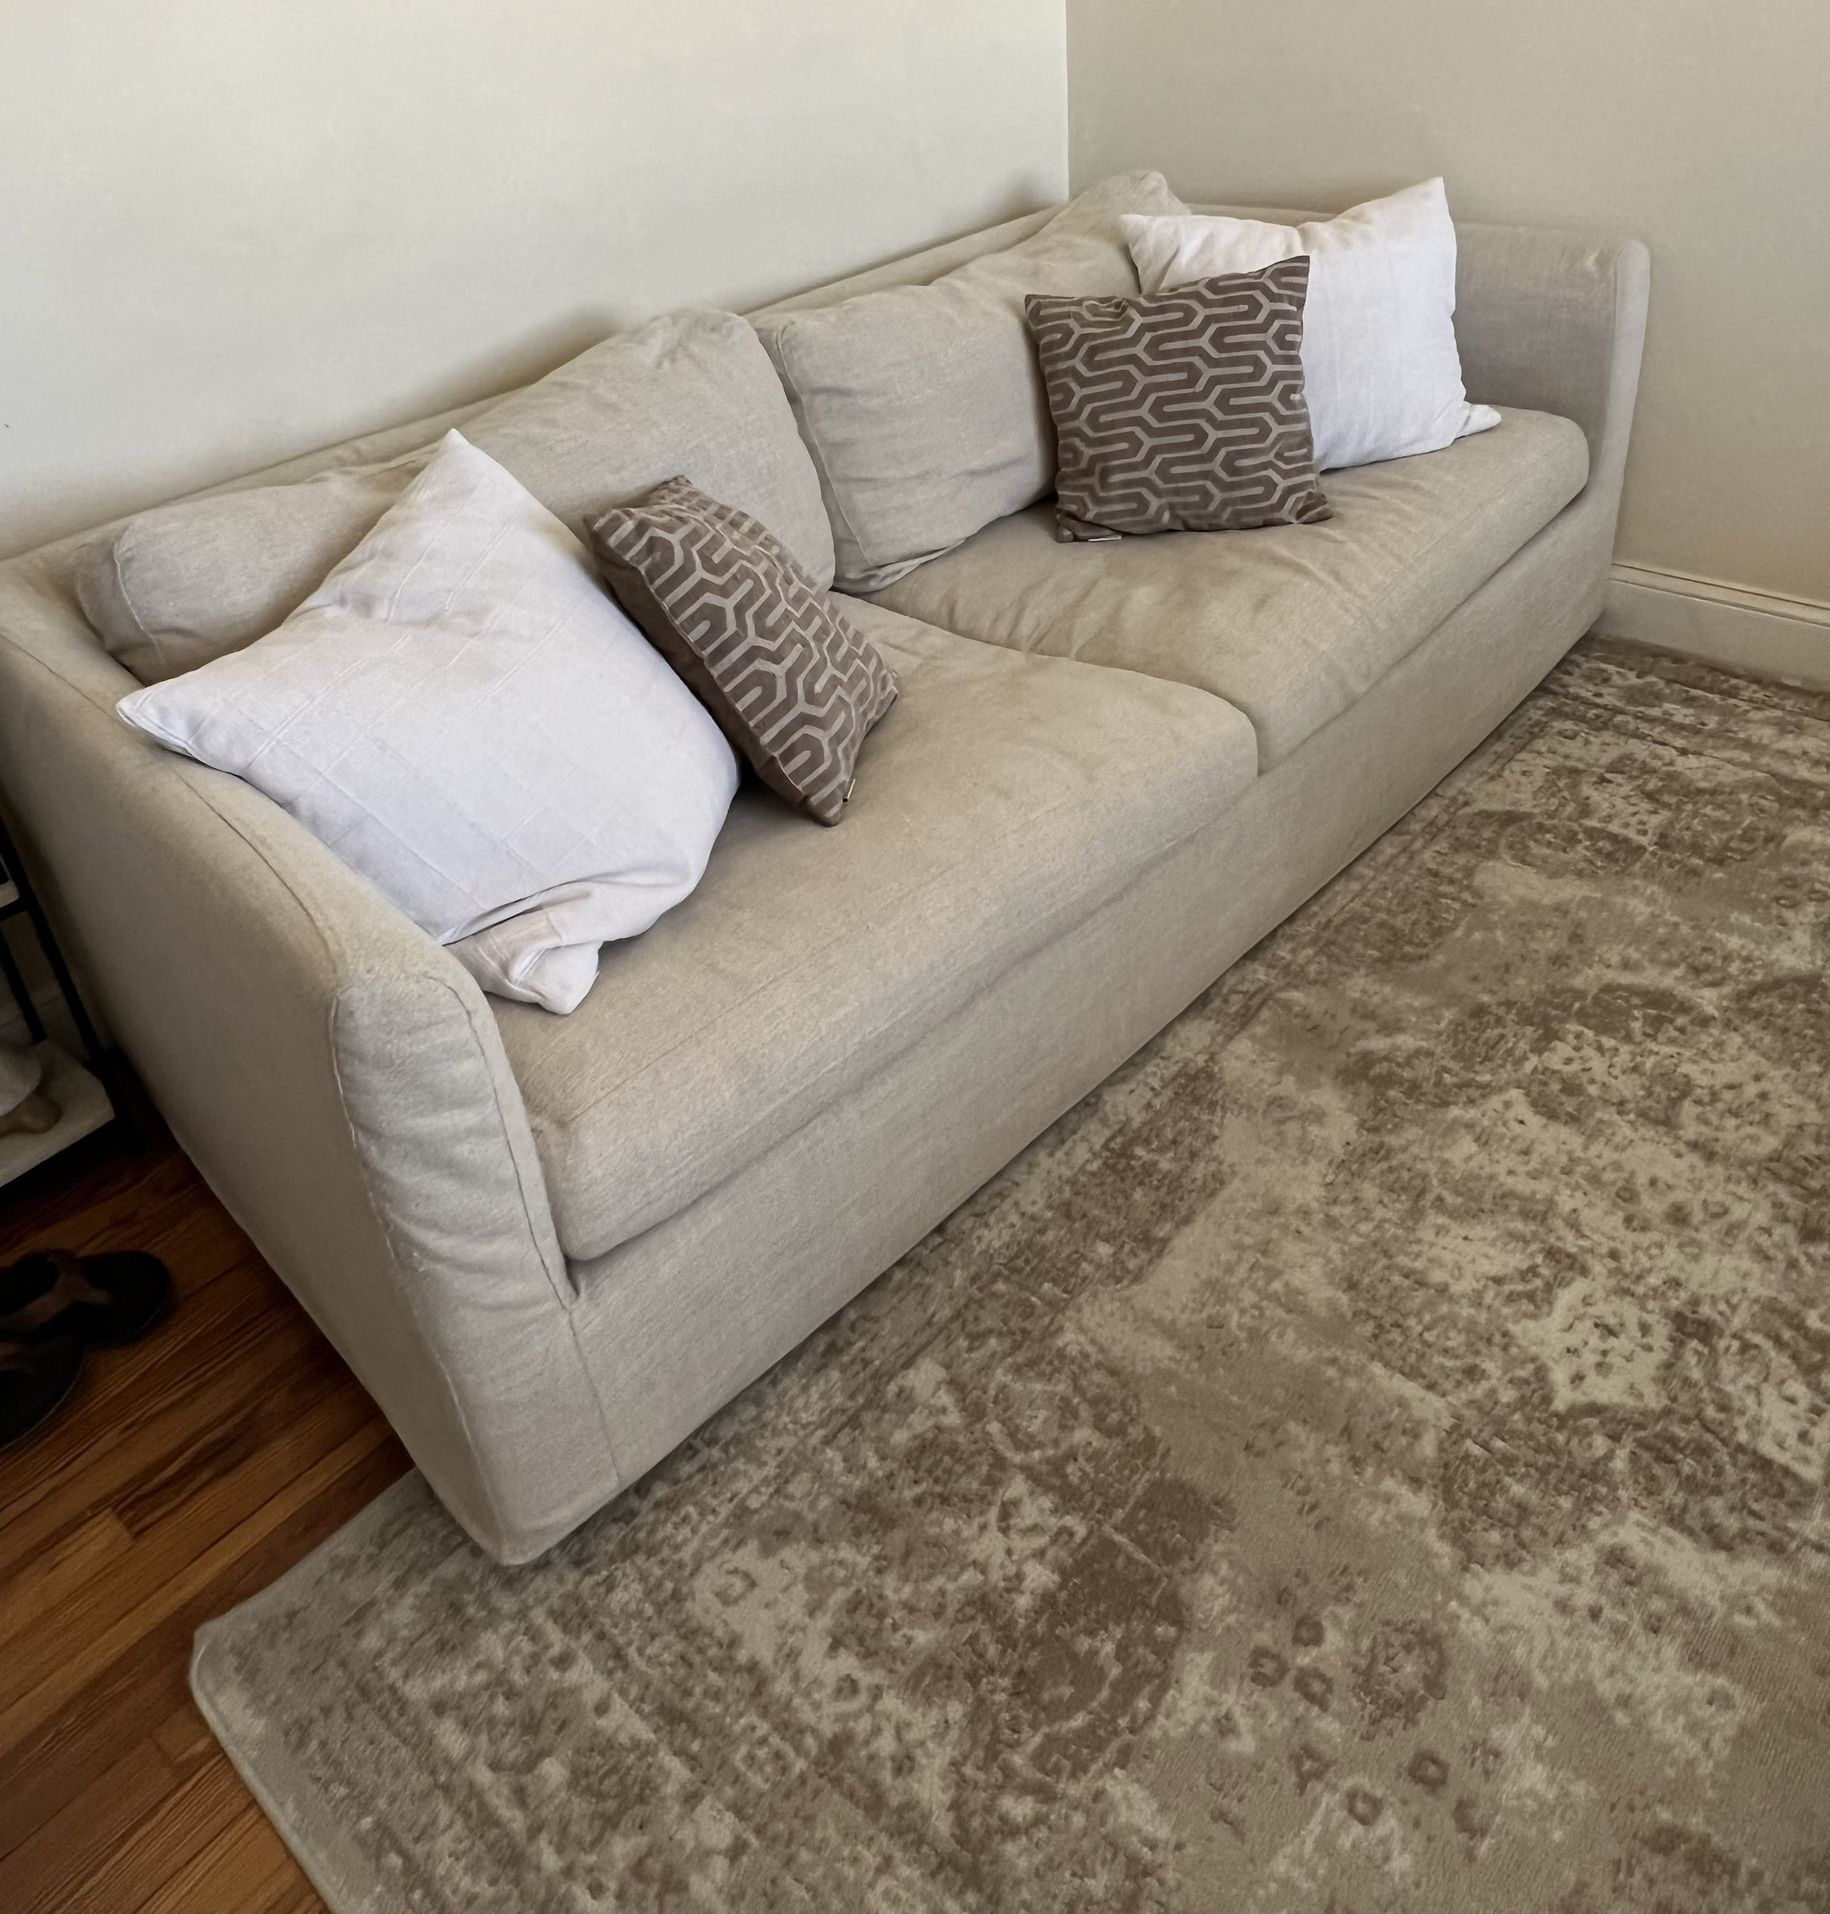 Linen Couch - $100 OBO